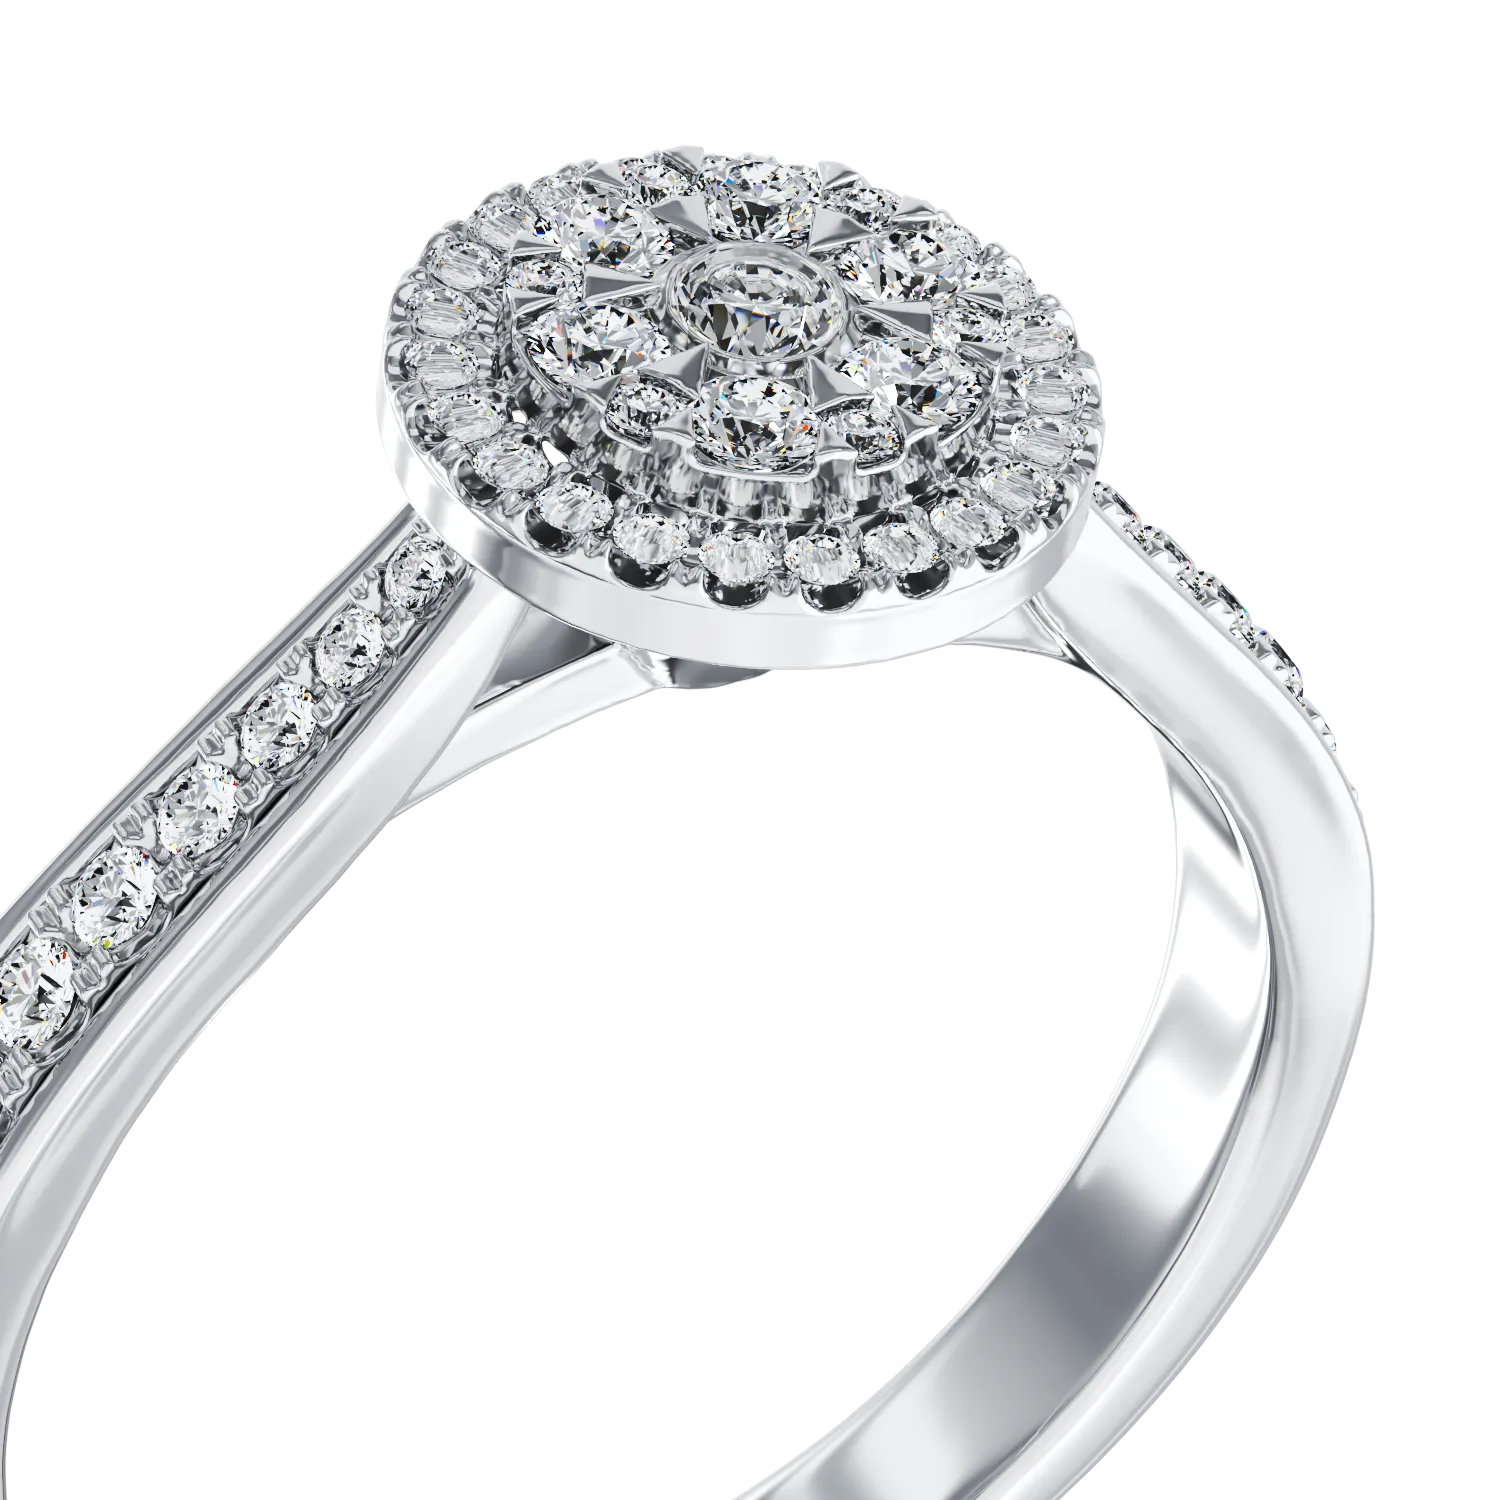 18K white gold engagement ring with 0.43ct diamonds